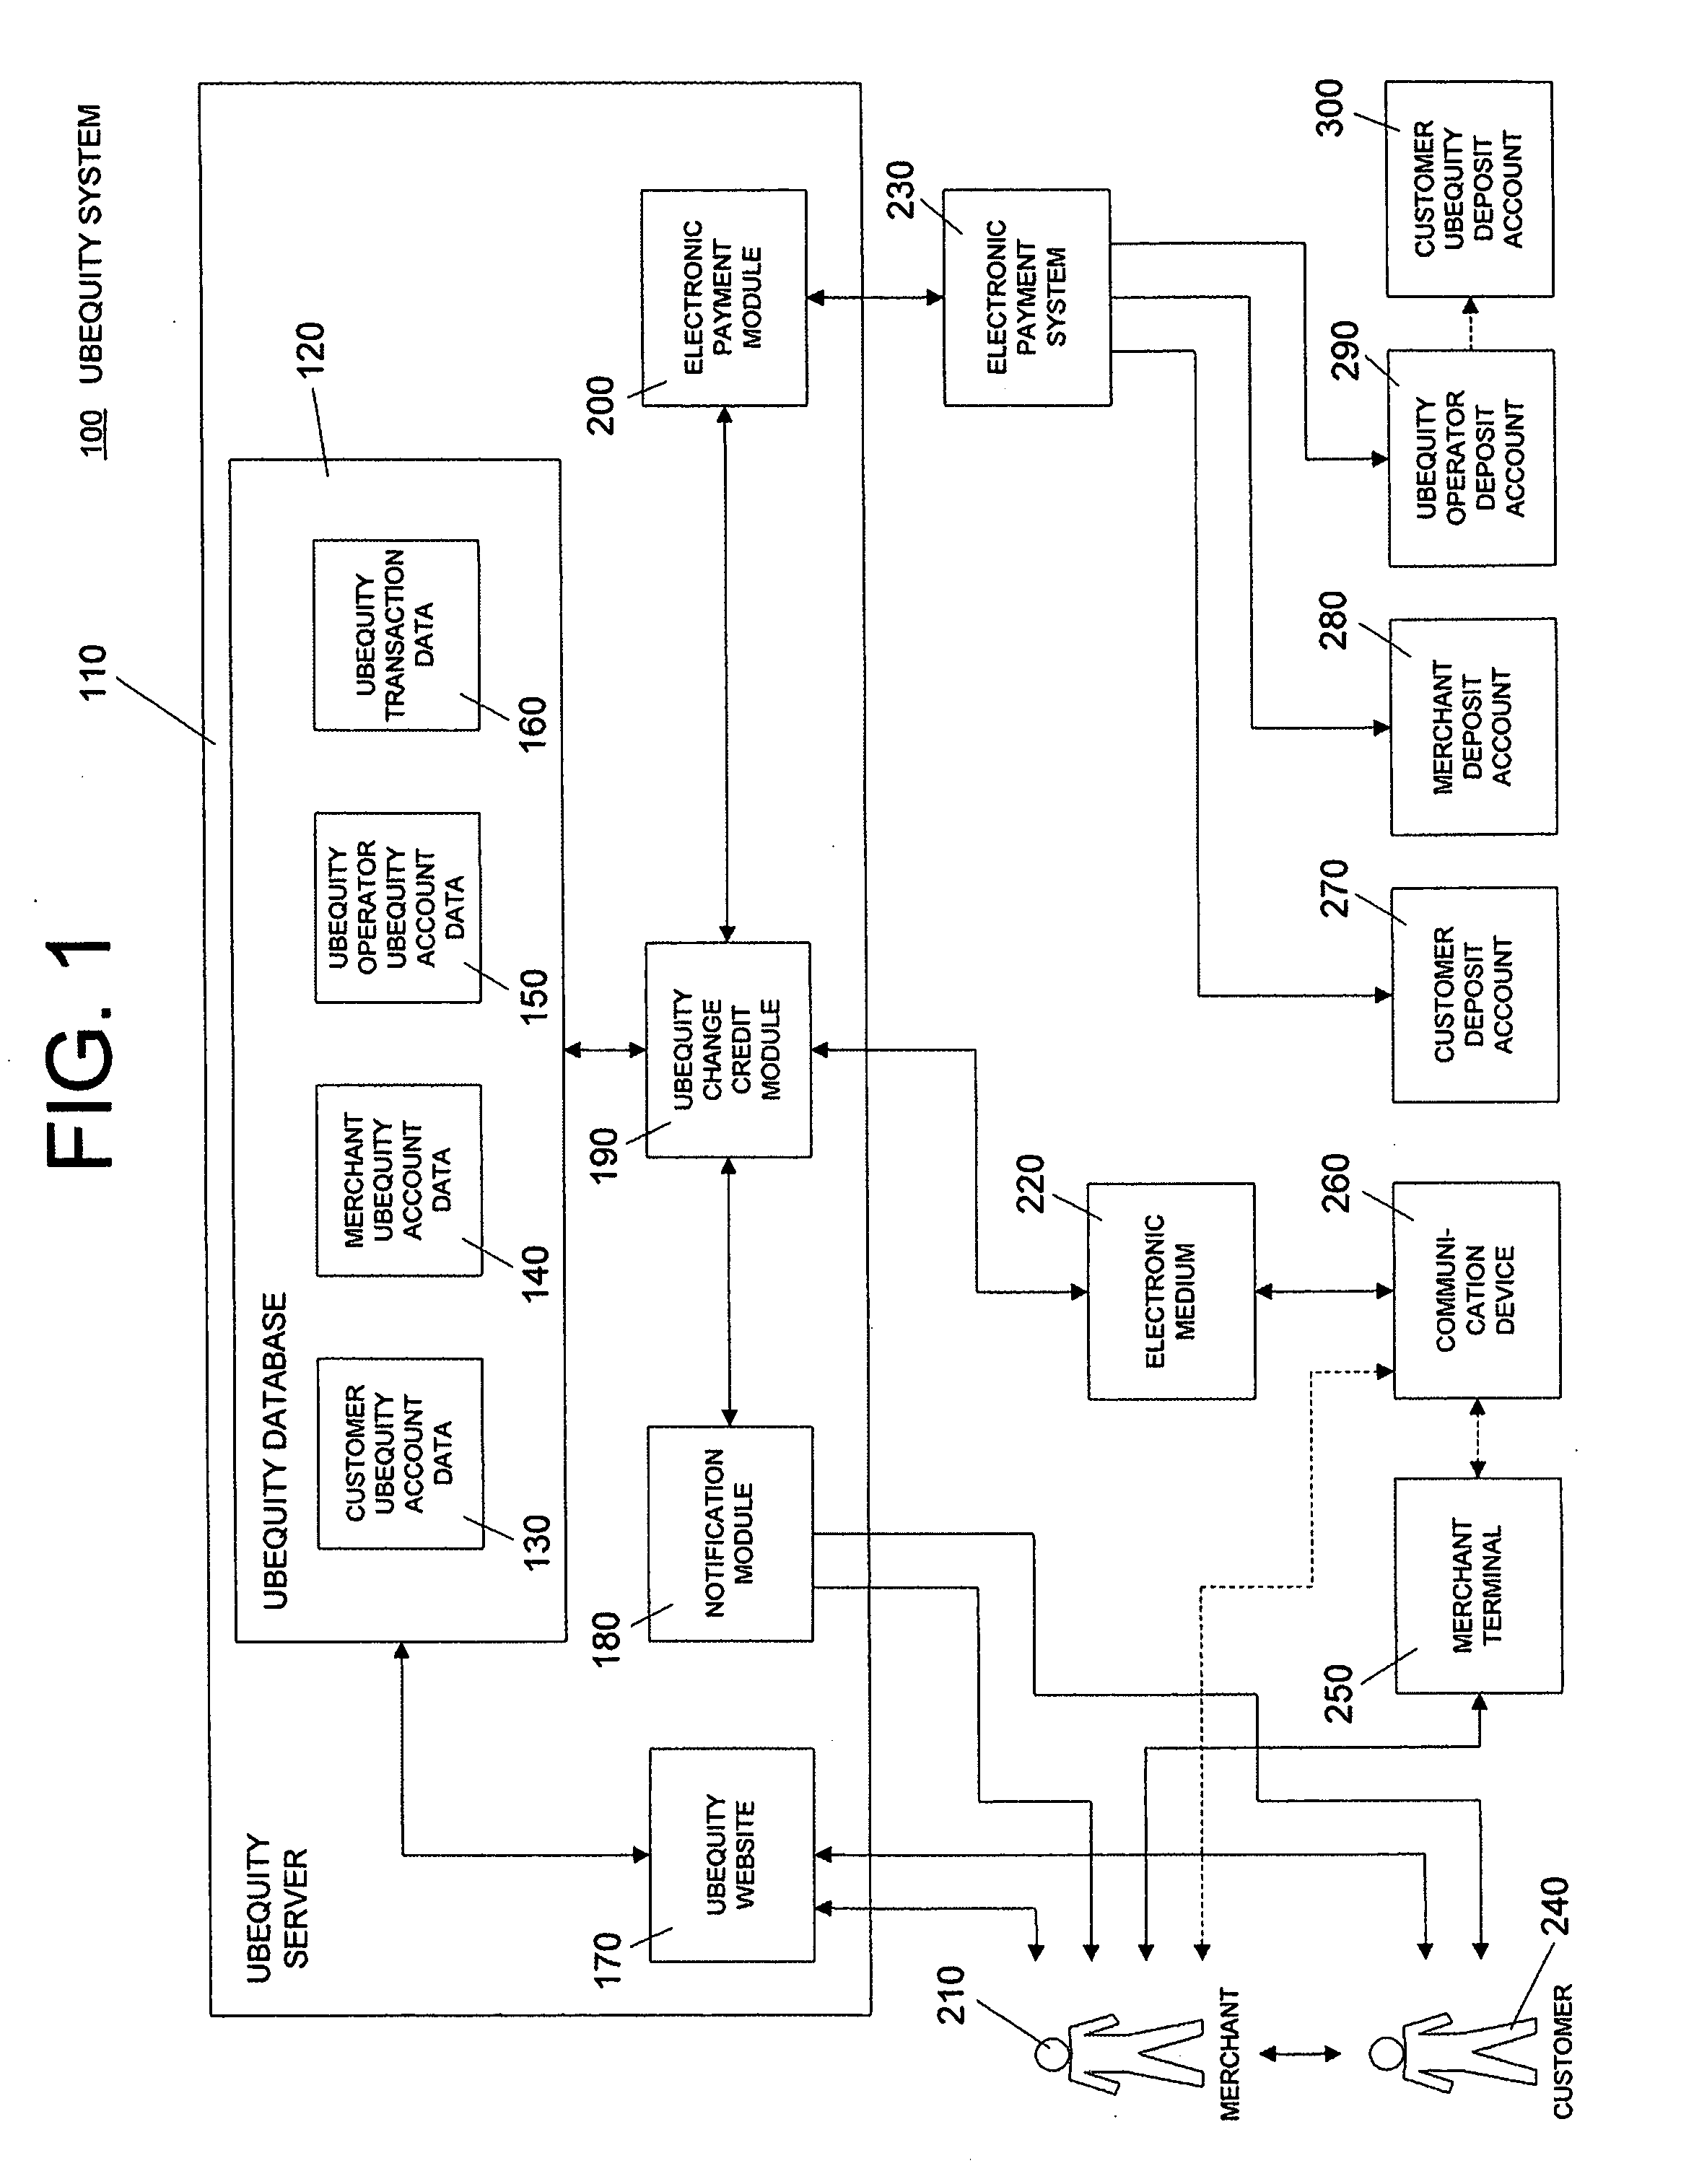 System and method of reducing or eliminating change in cash transaction by crediting at least part of change to buyer's account over electronic medium